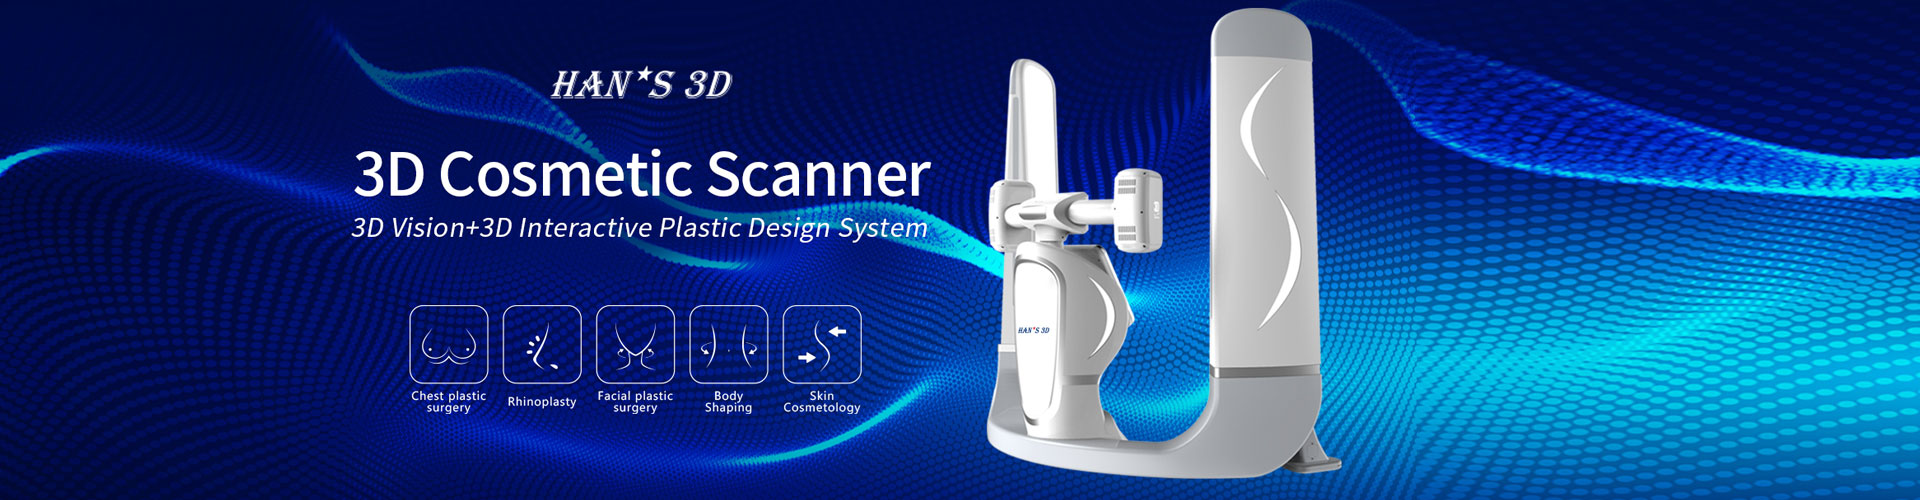 3D Cosmetic Scanner